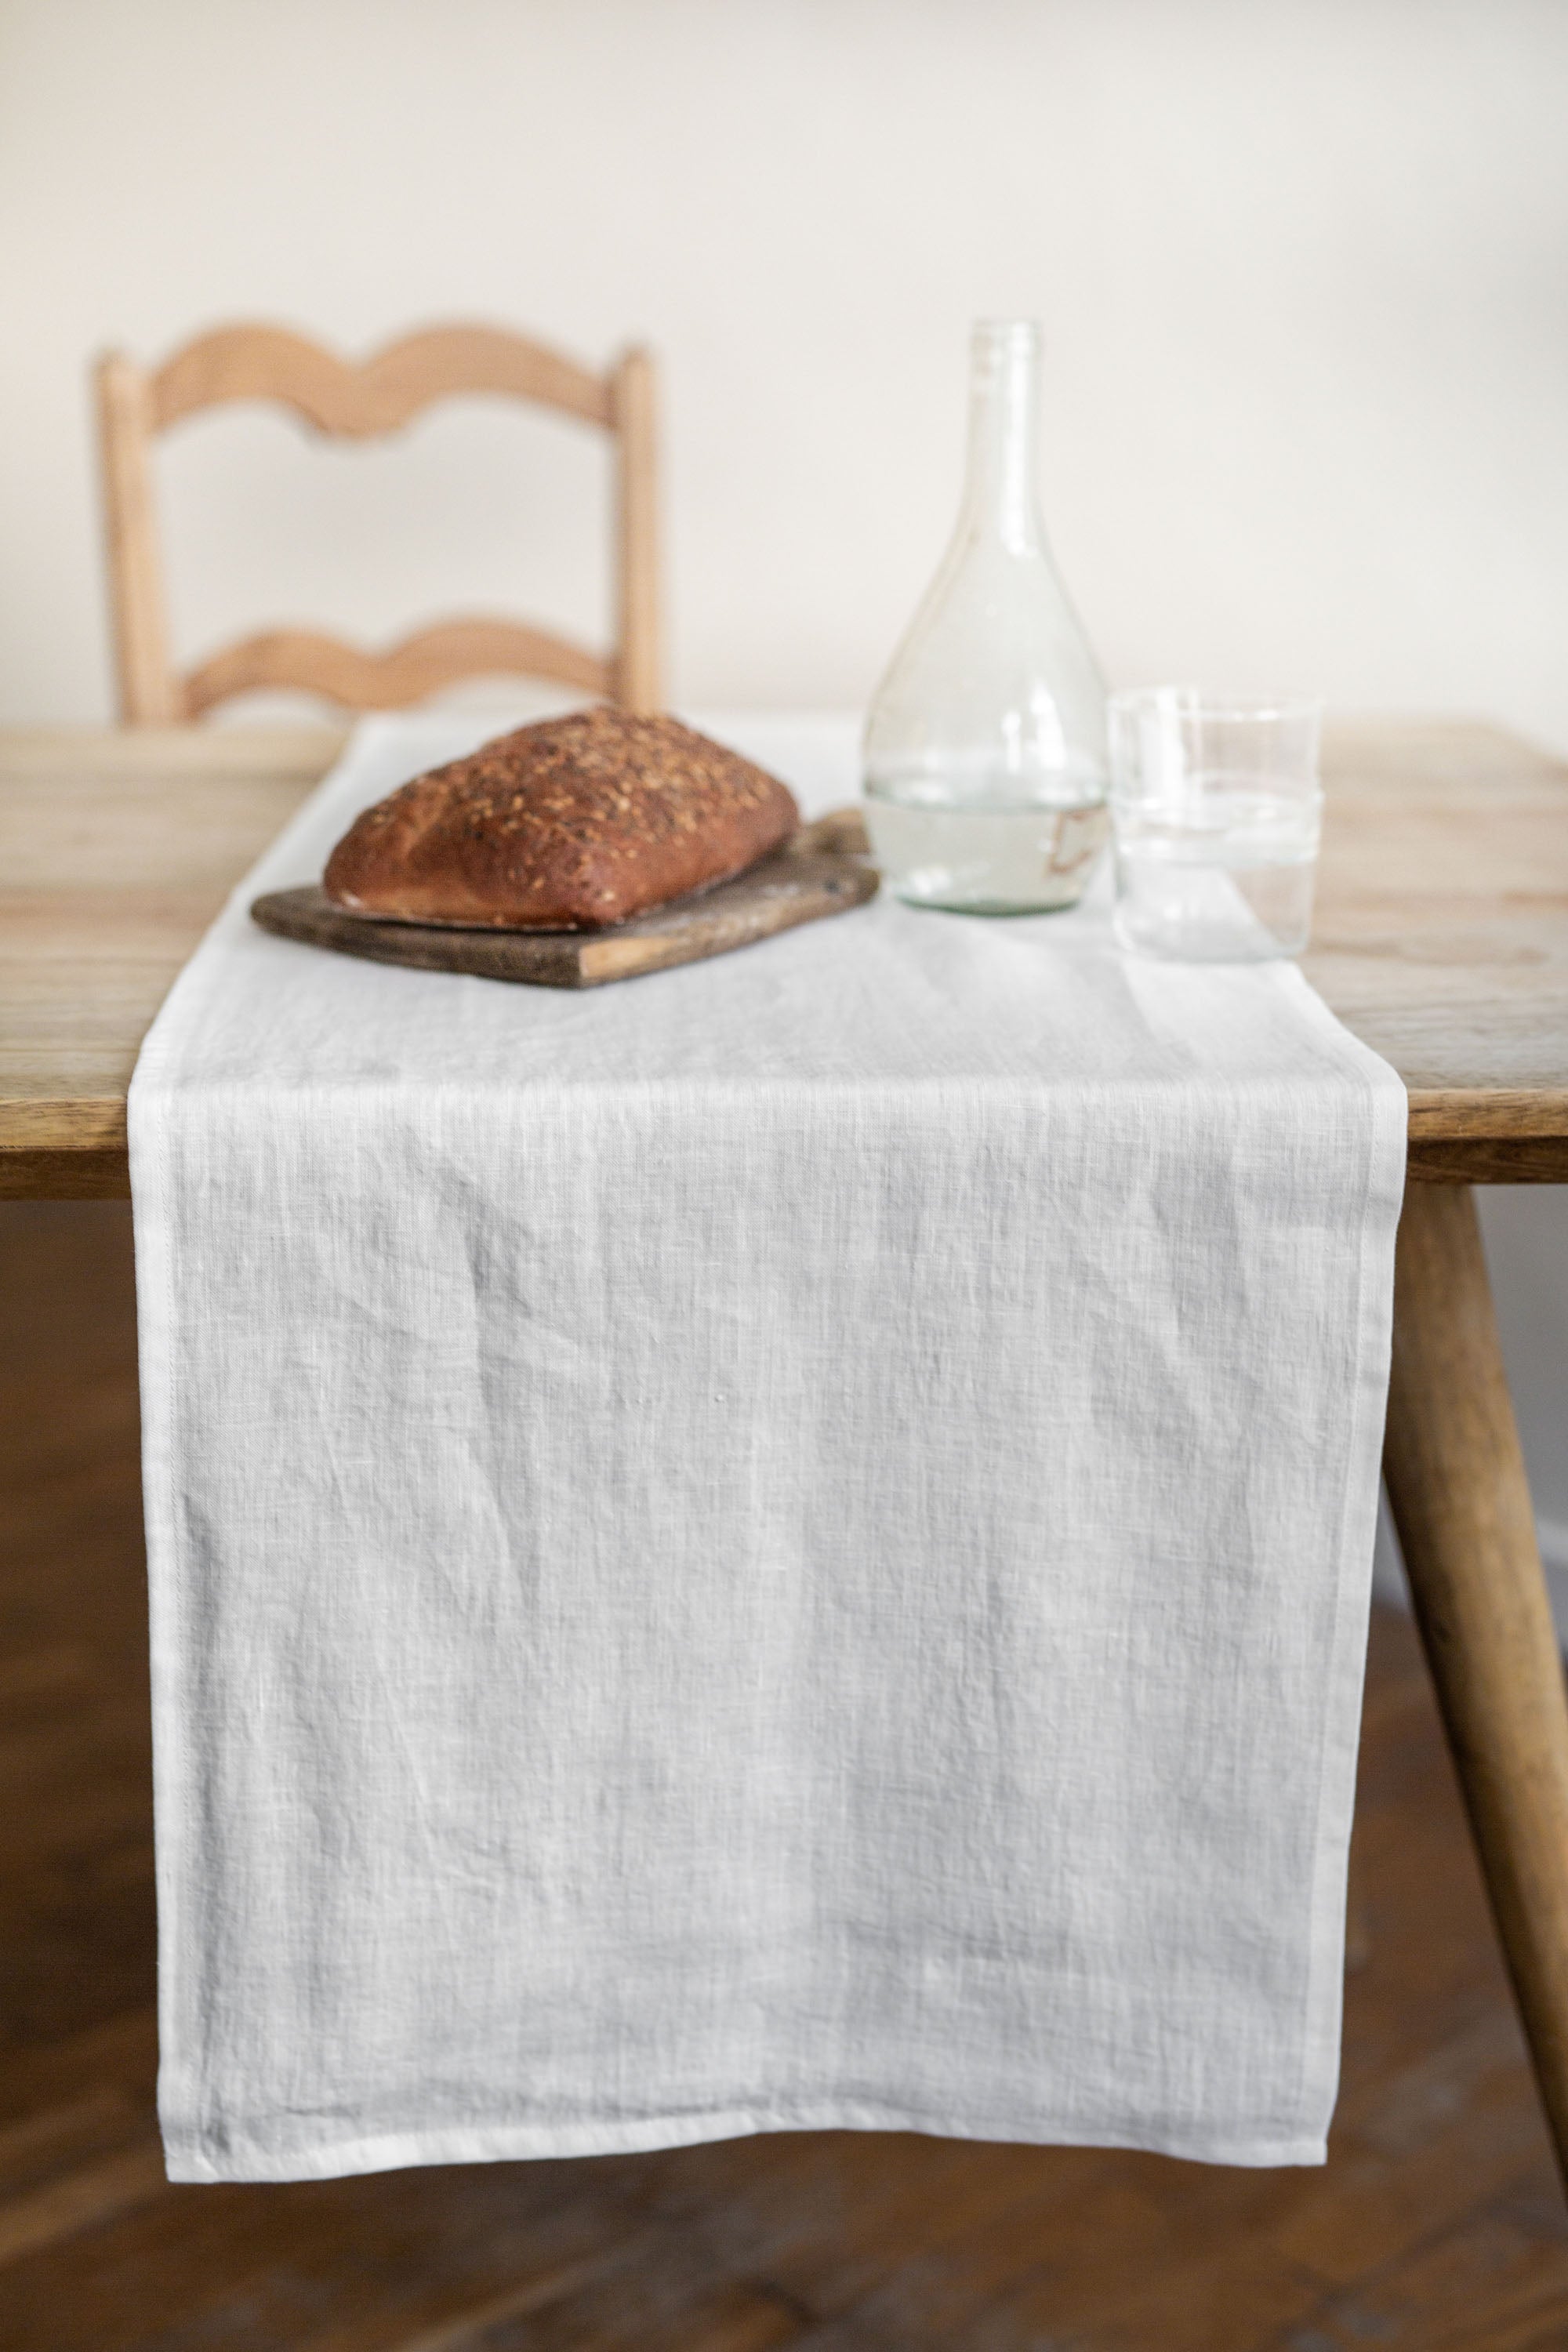 Rustic Dinner Table With White Linen Table Runner By AmourlInen